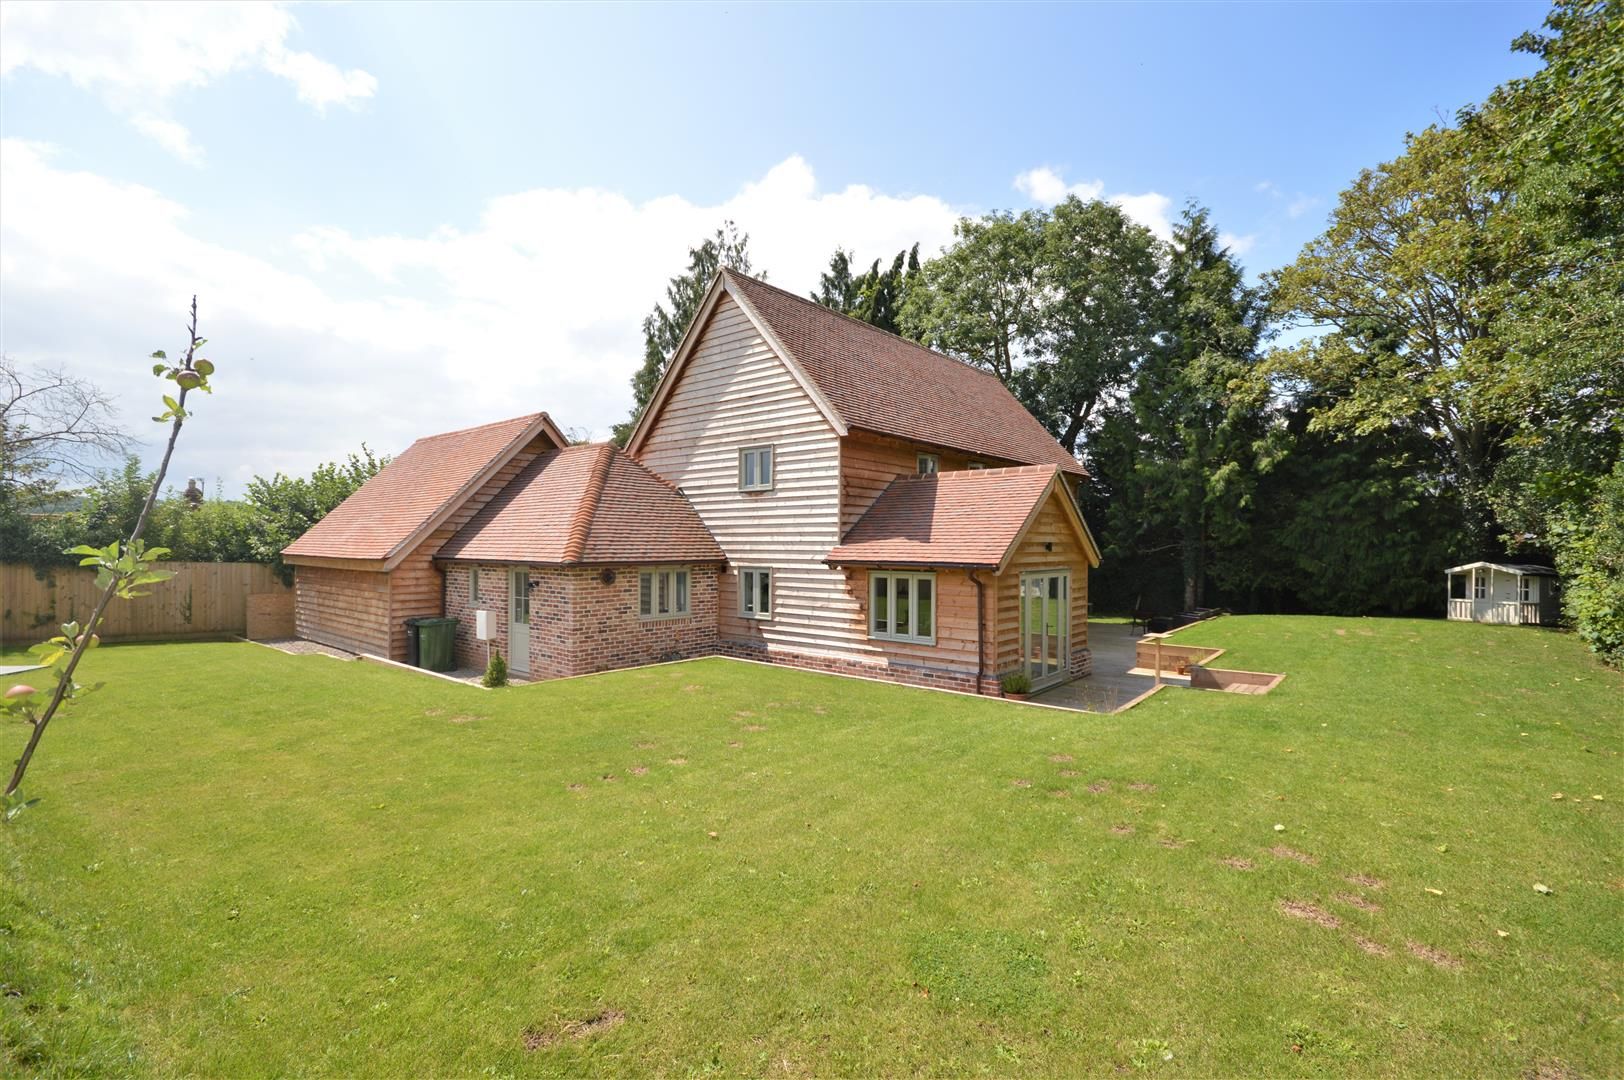 4 bed detached for sale in Bodenham 12